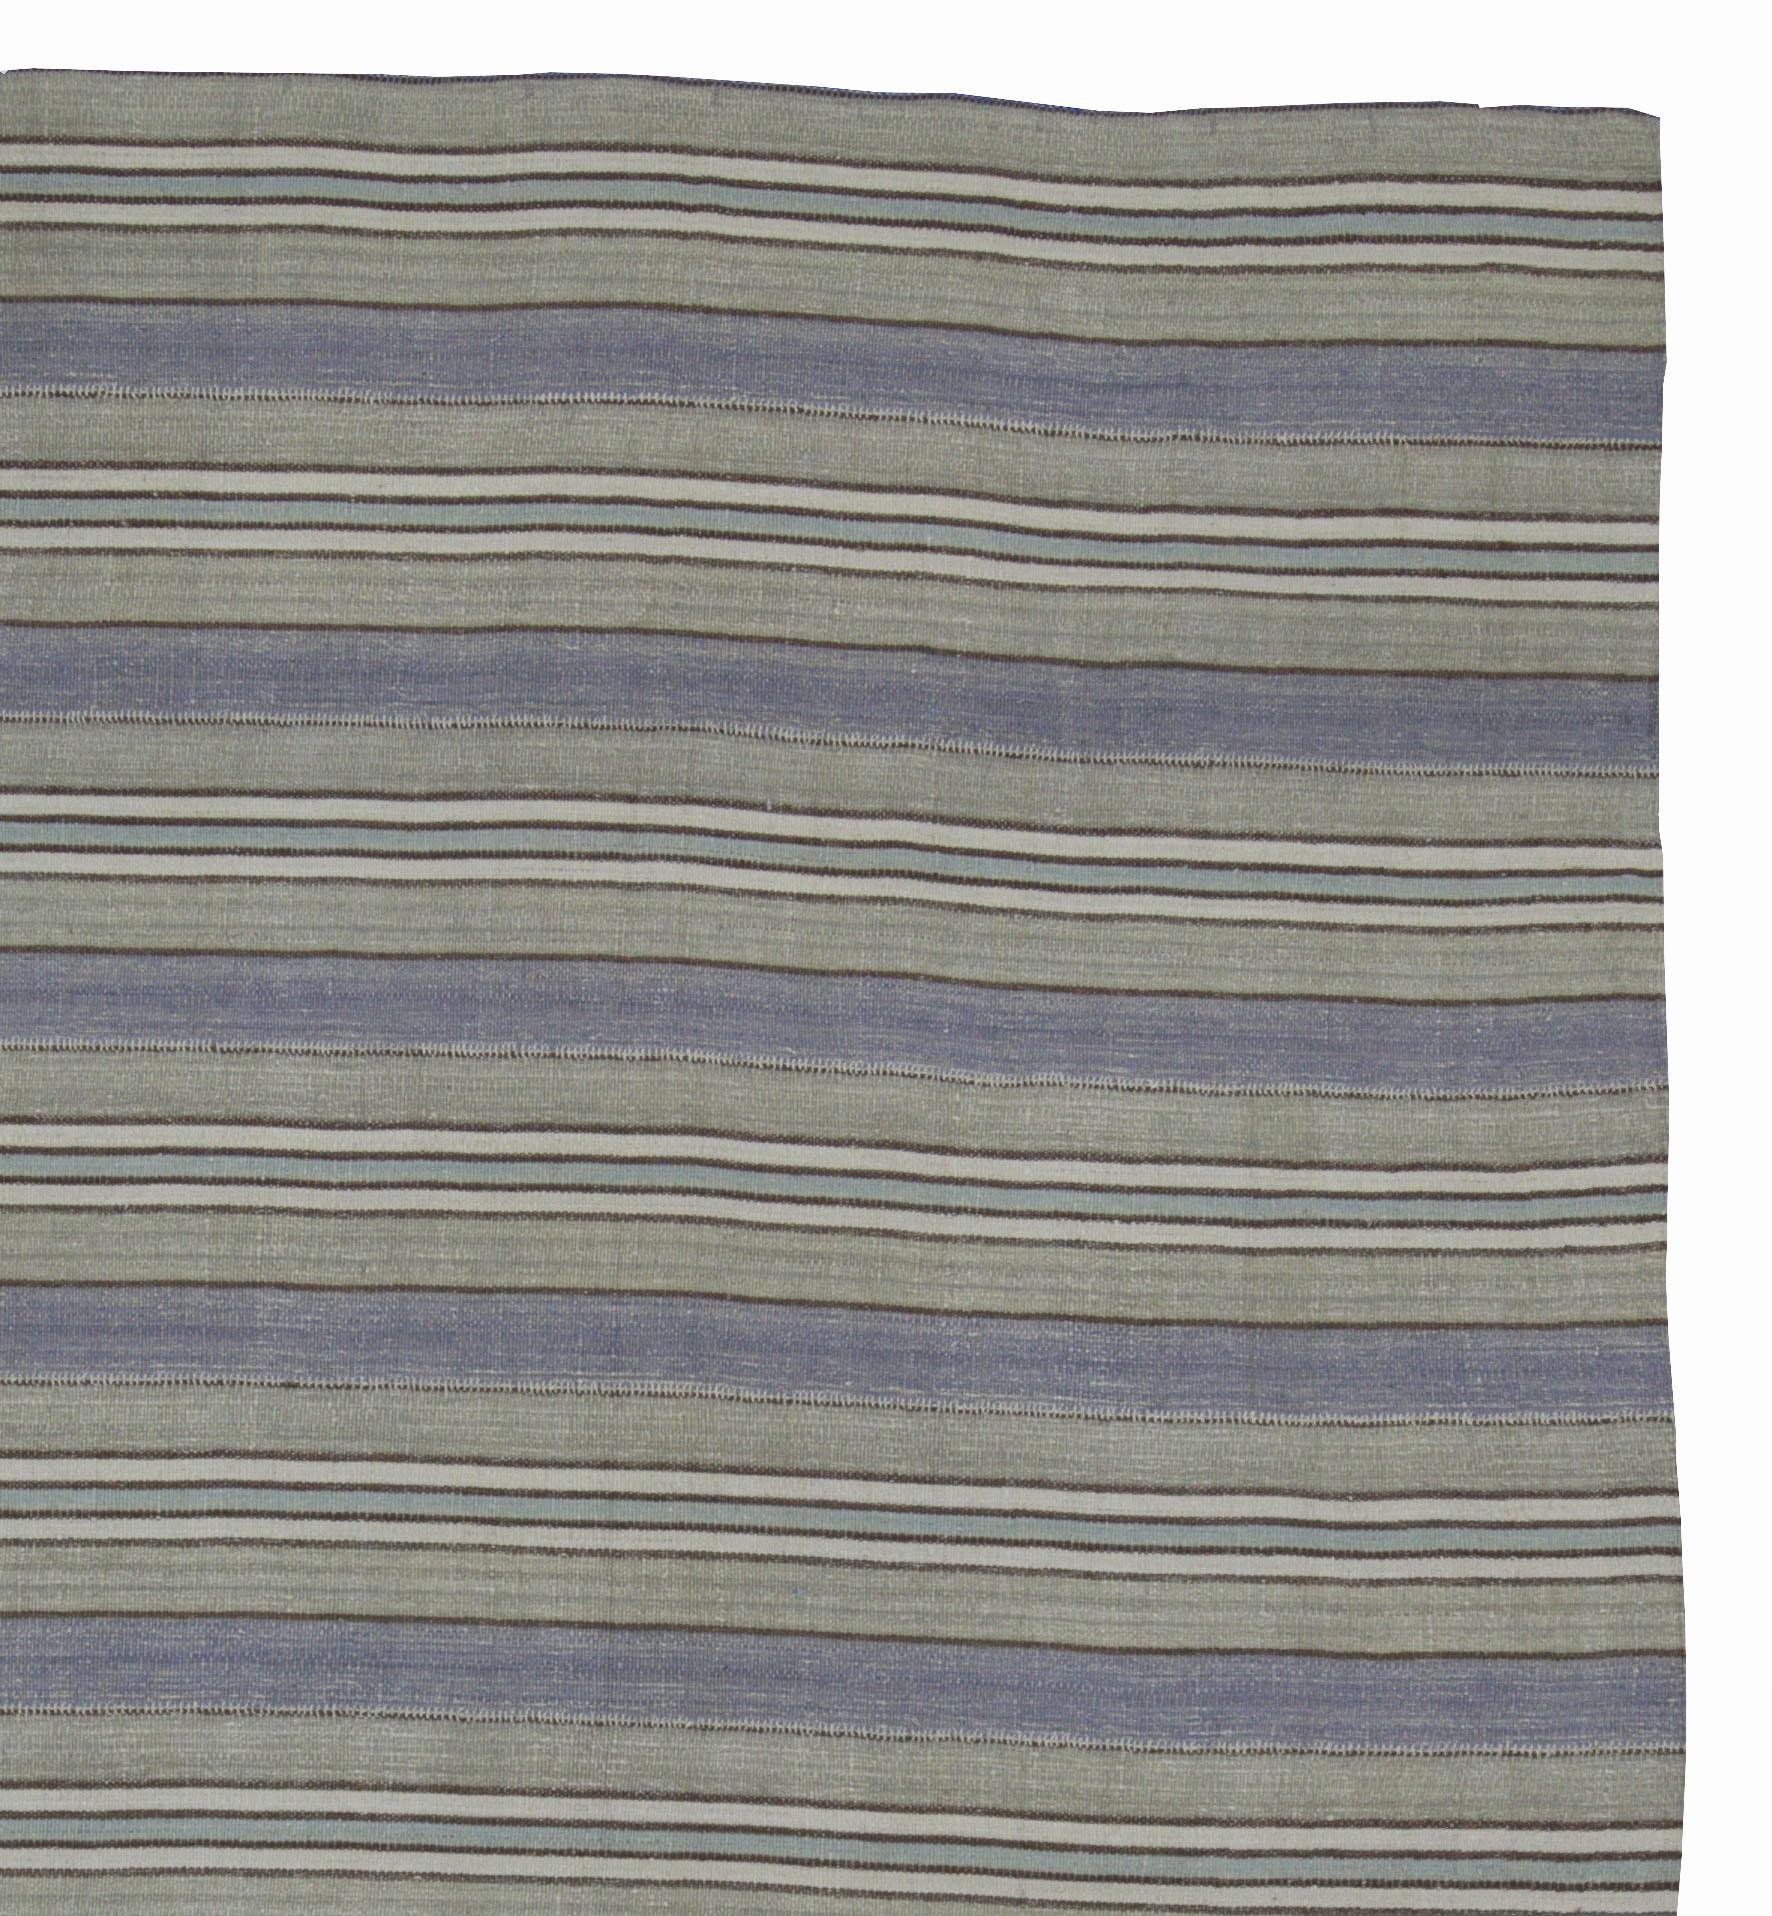 A new production Turkish rug handwoven from the finest sheep’s wool and colored with all-natural vegetable dyes that are safe for humans and pets. It’s a traditional Kilim flat-weave design featuring a lovely blue and gray striped field with black